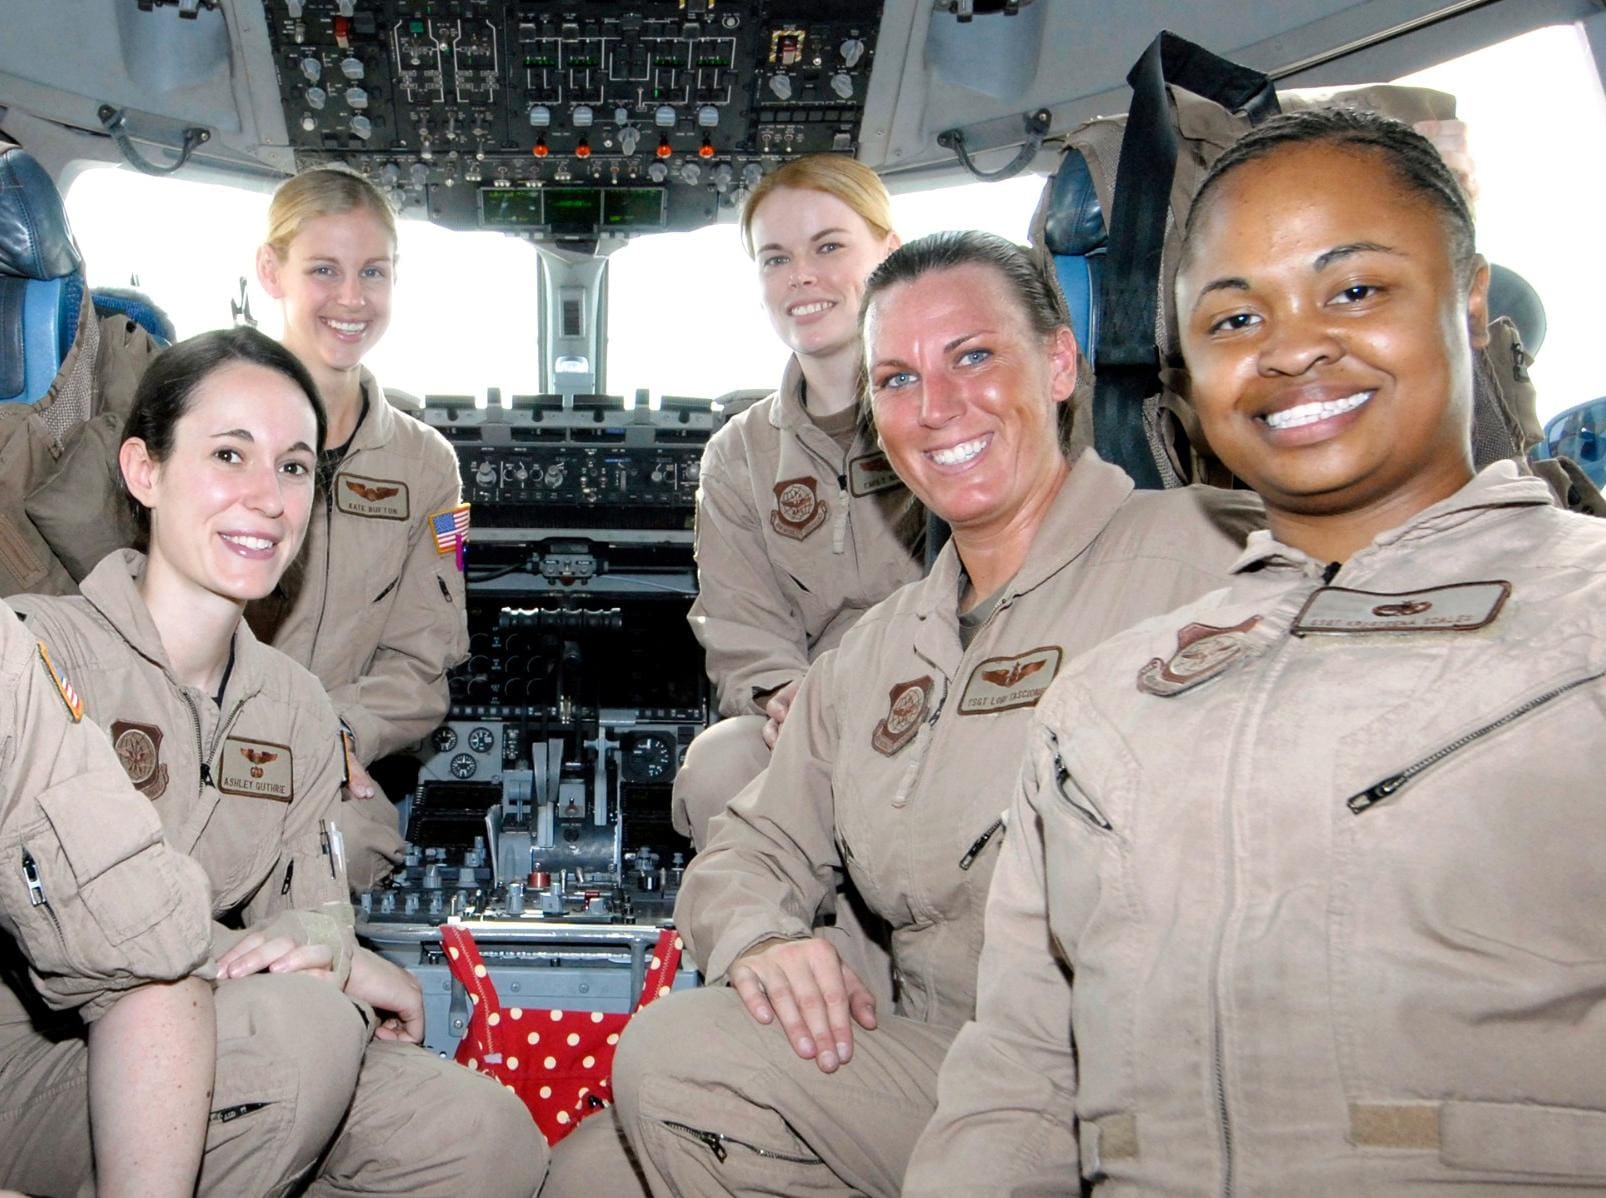 Women in the Air Force